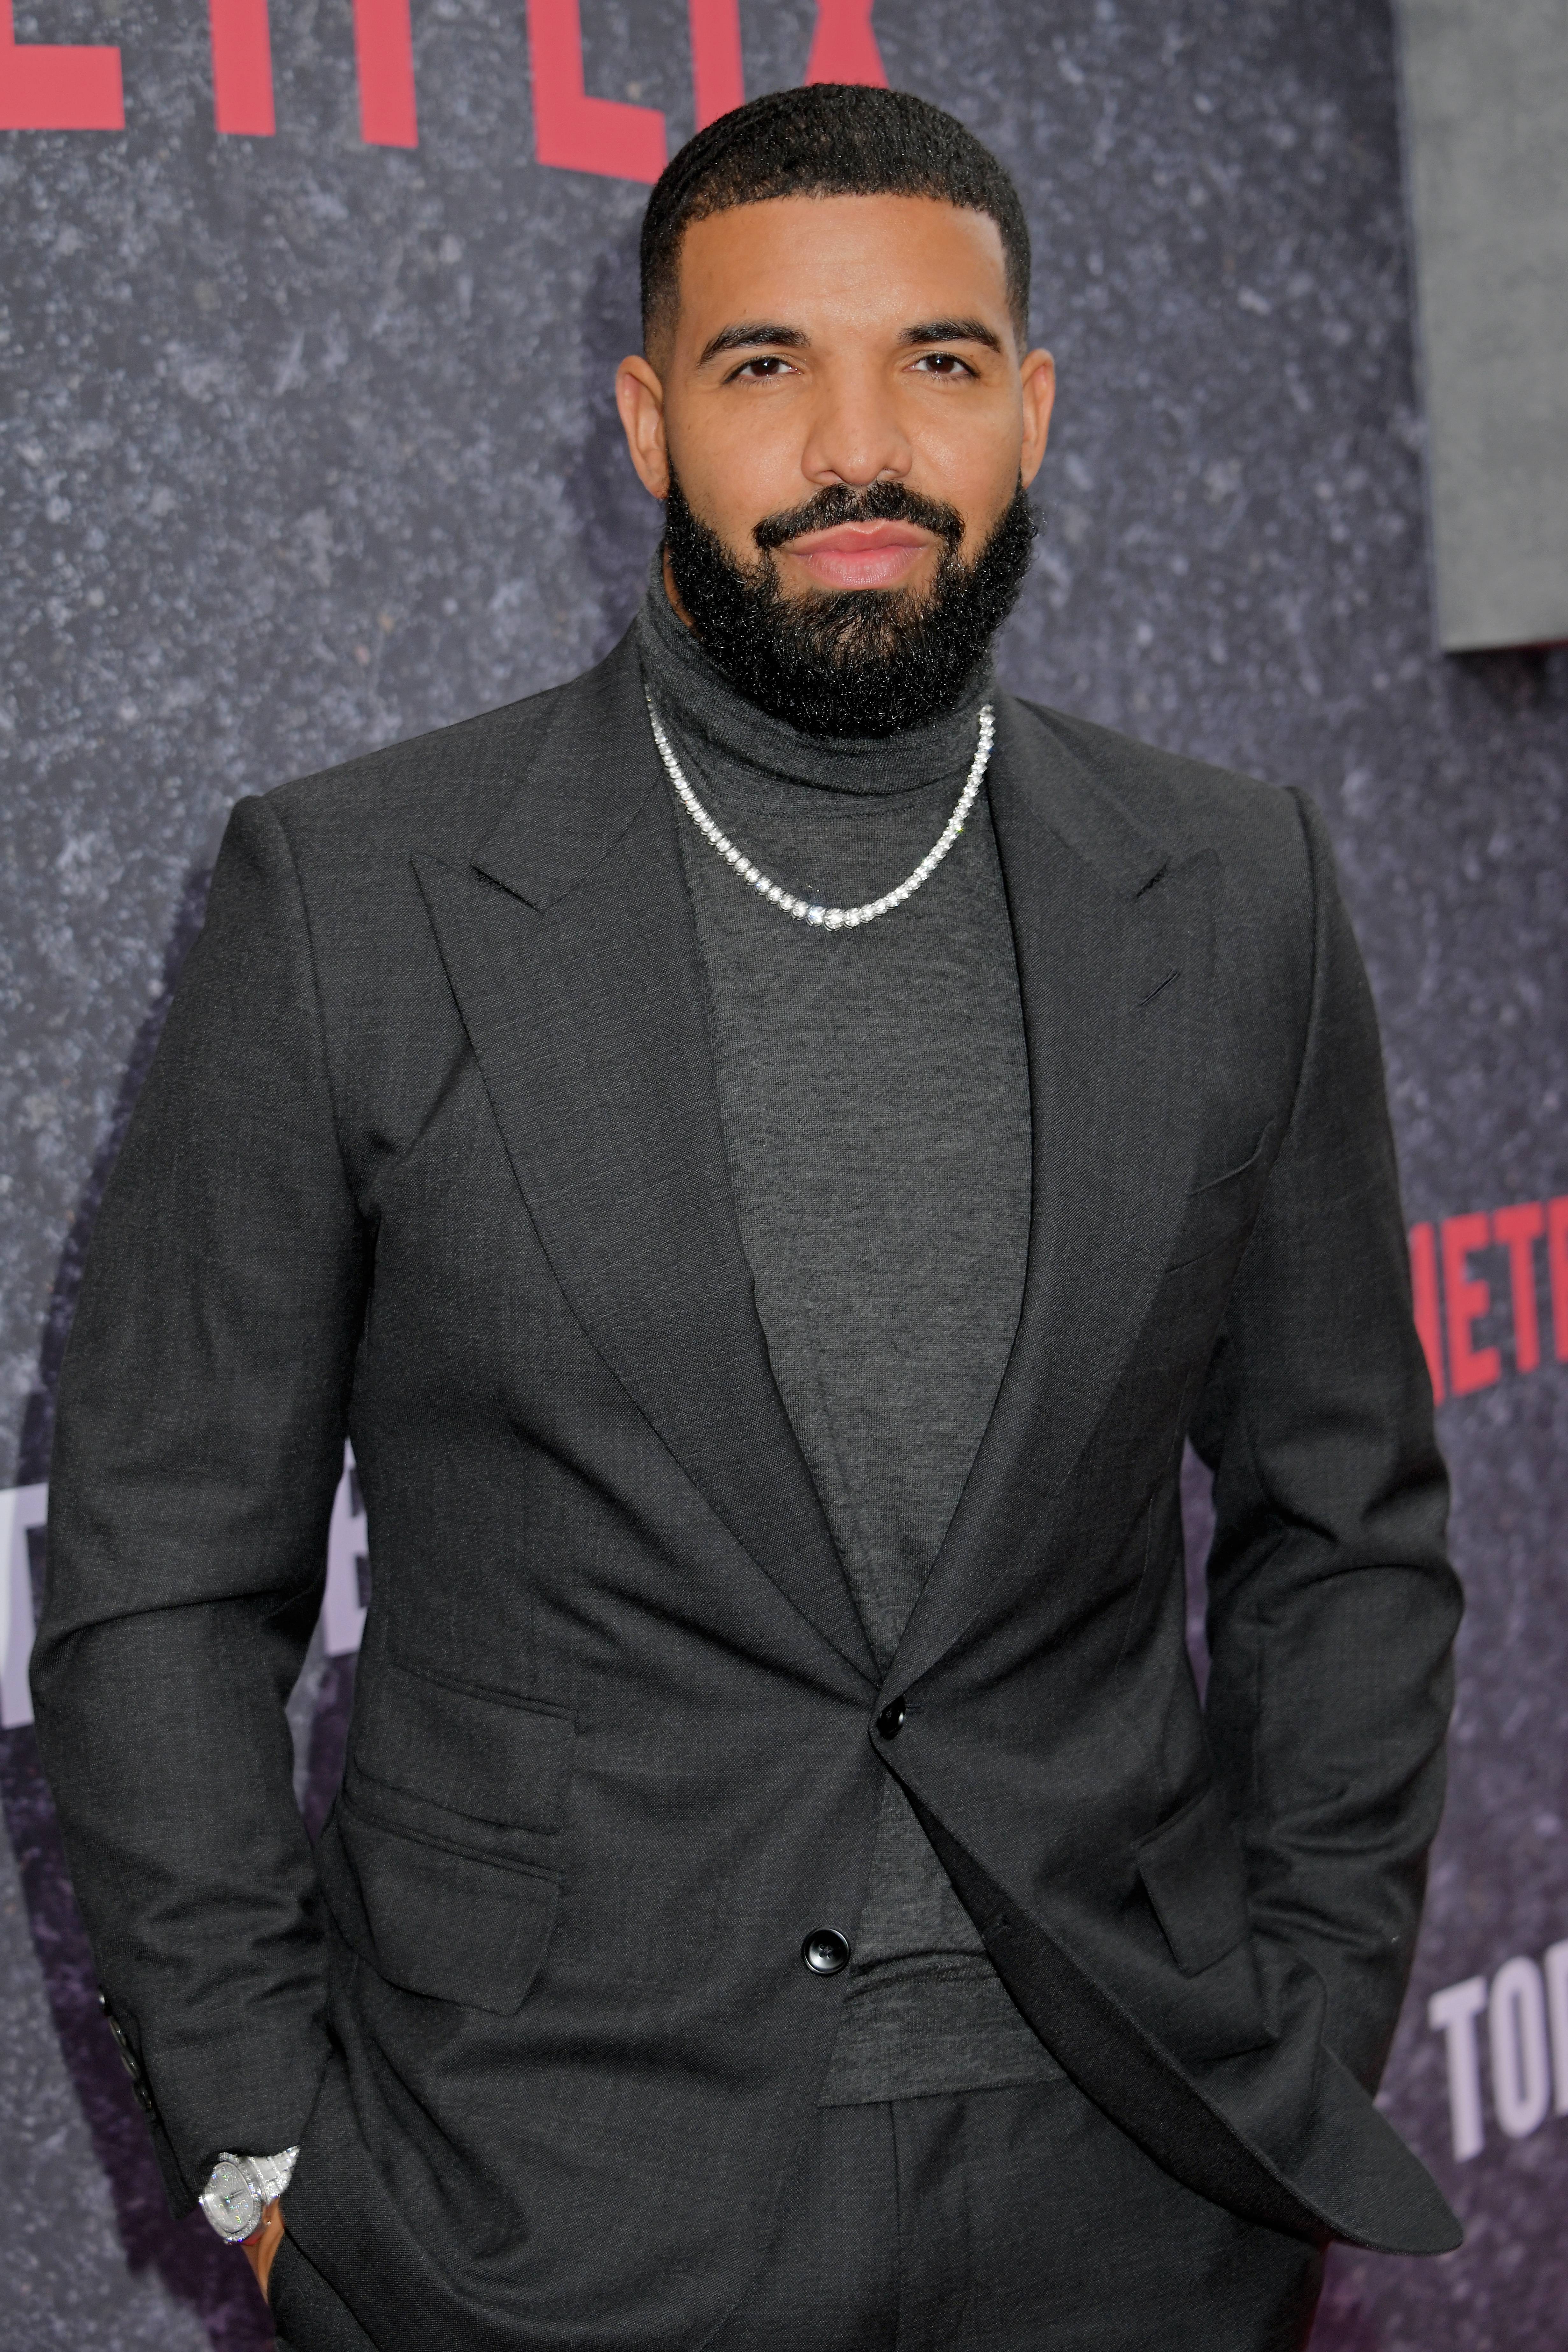 LONDON, ENGLAND - SEPTEMBER 04: Drake attends the UK Premiere of "Top Boy" at the Hackney Picturehouse on September 04, 2019 in London, England. (Photo by David M. Benett/Dave Benett/WireImage)